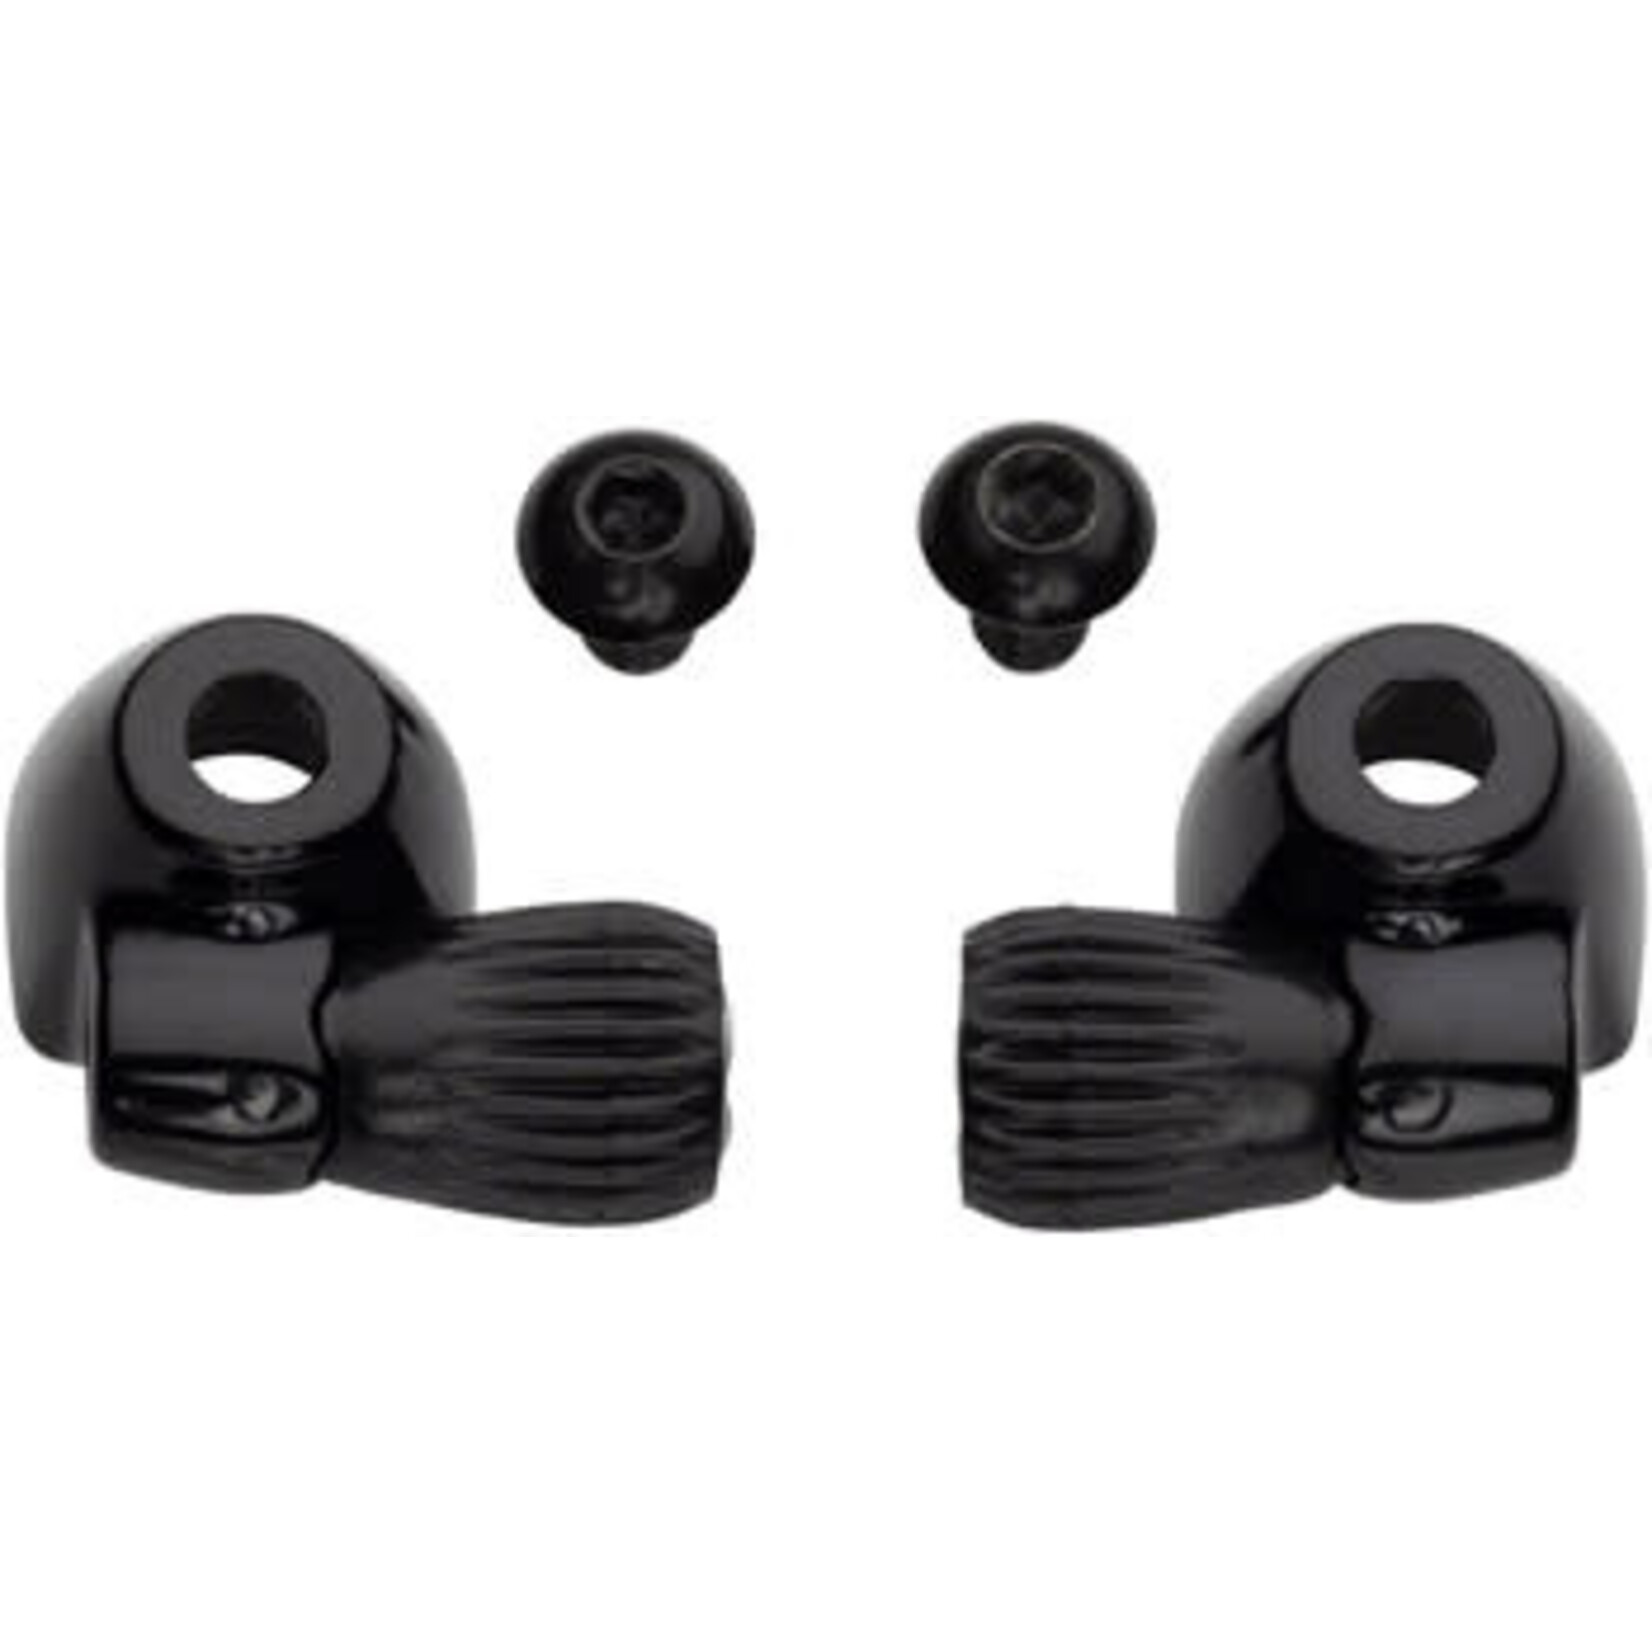 Problem Solvers Problem Solvers Downtube Housing Stops with Barrel Adjusters Black